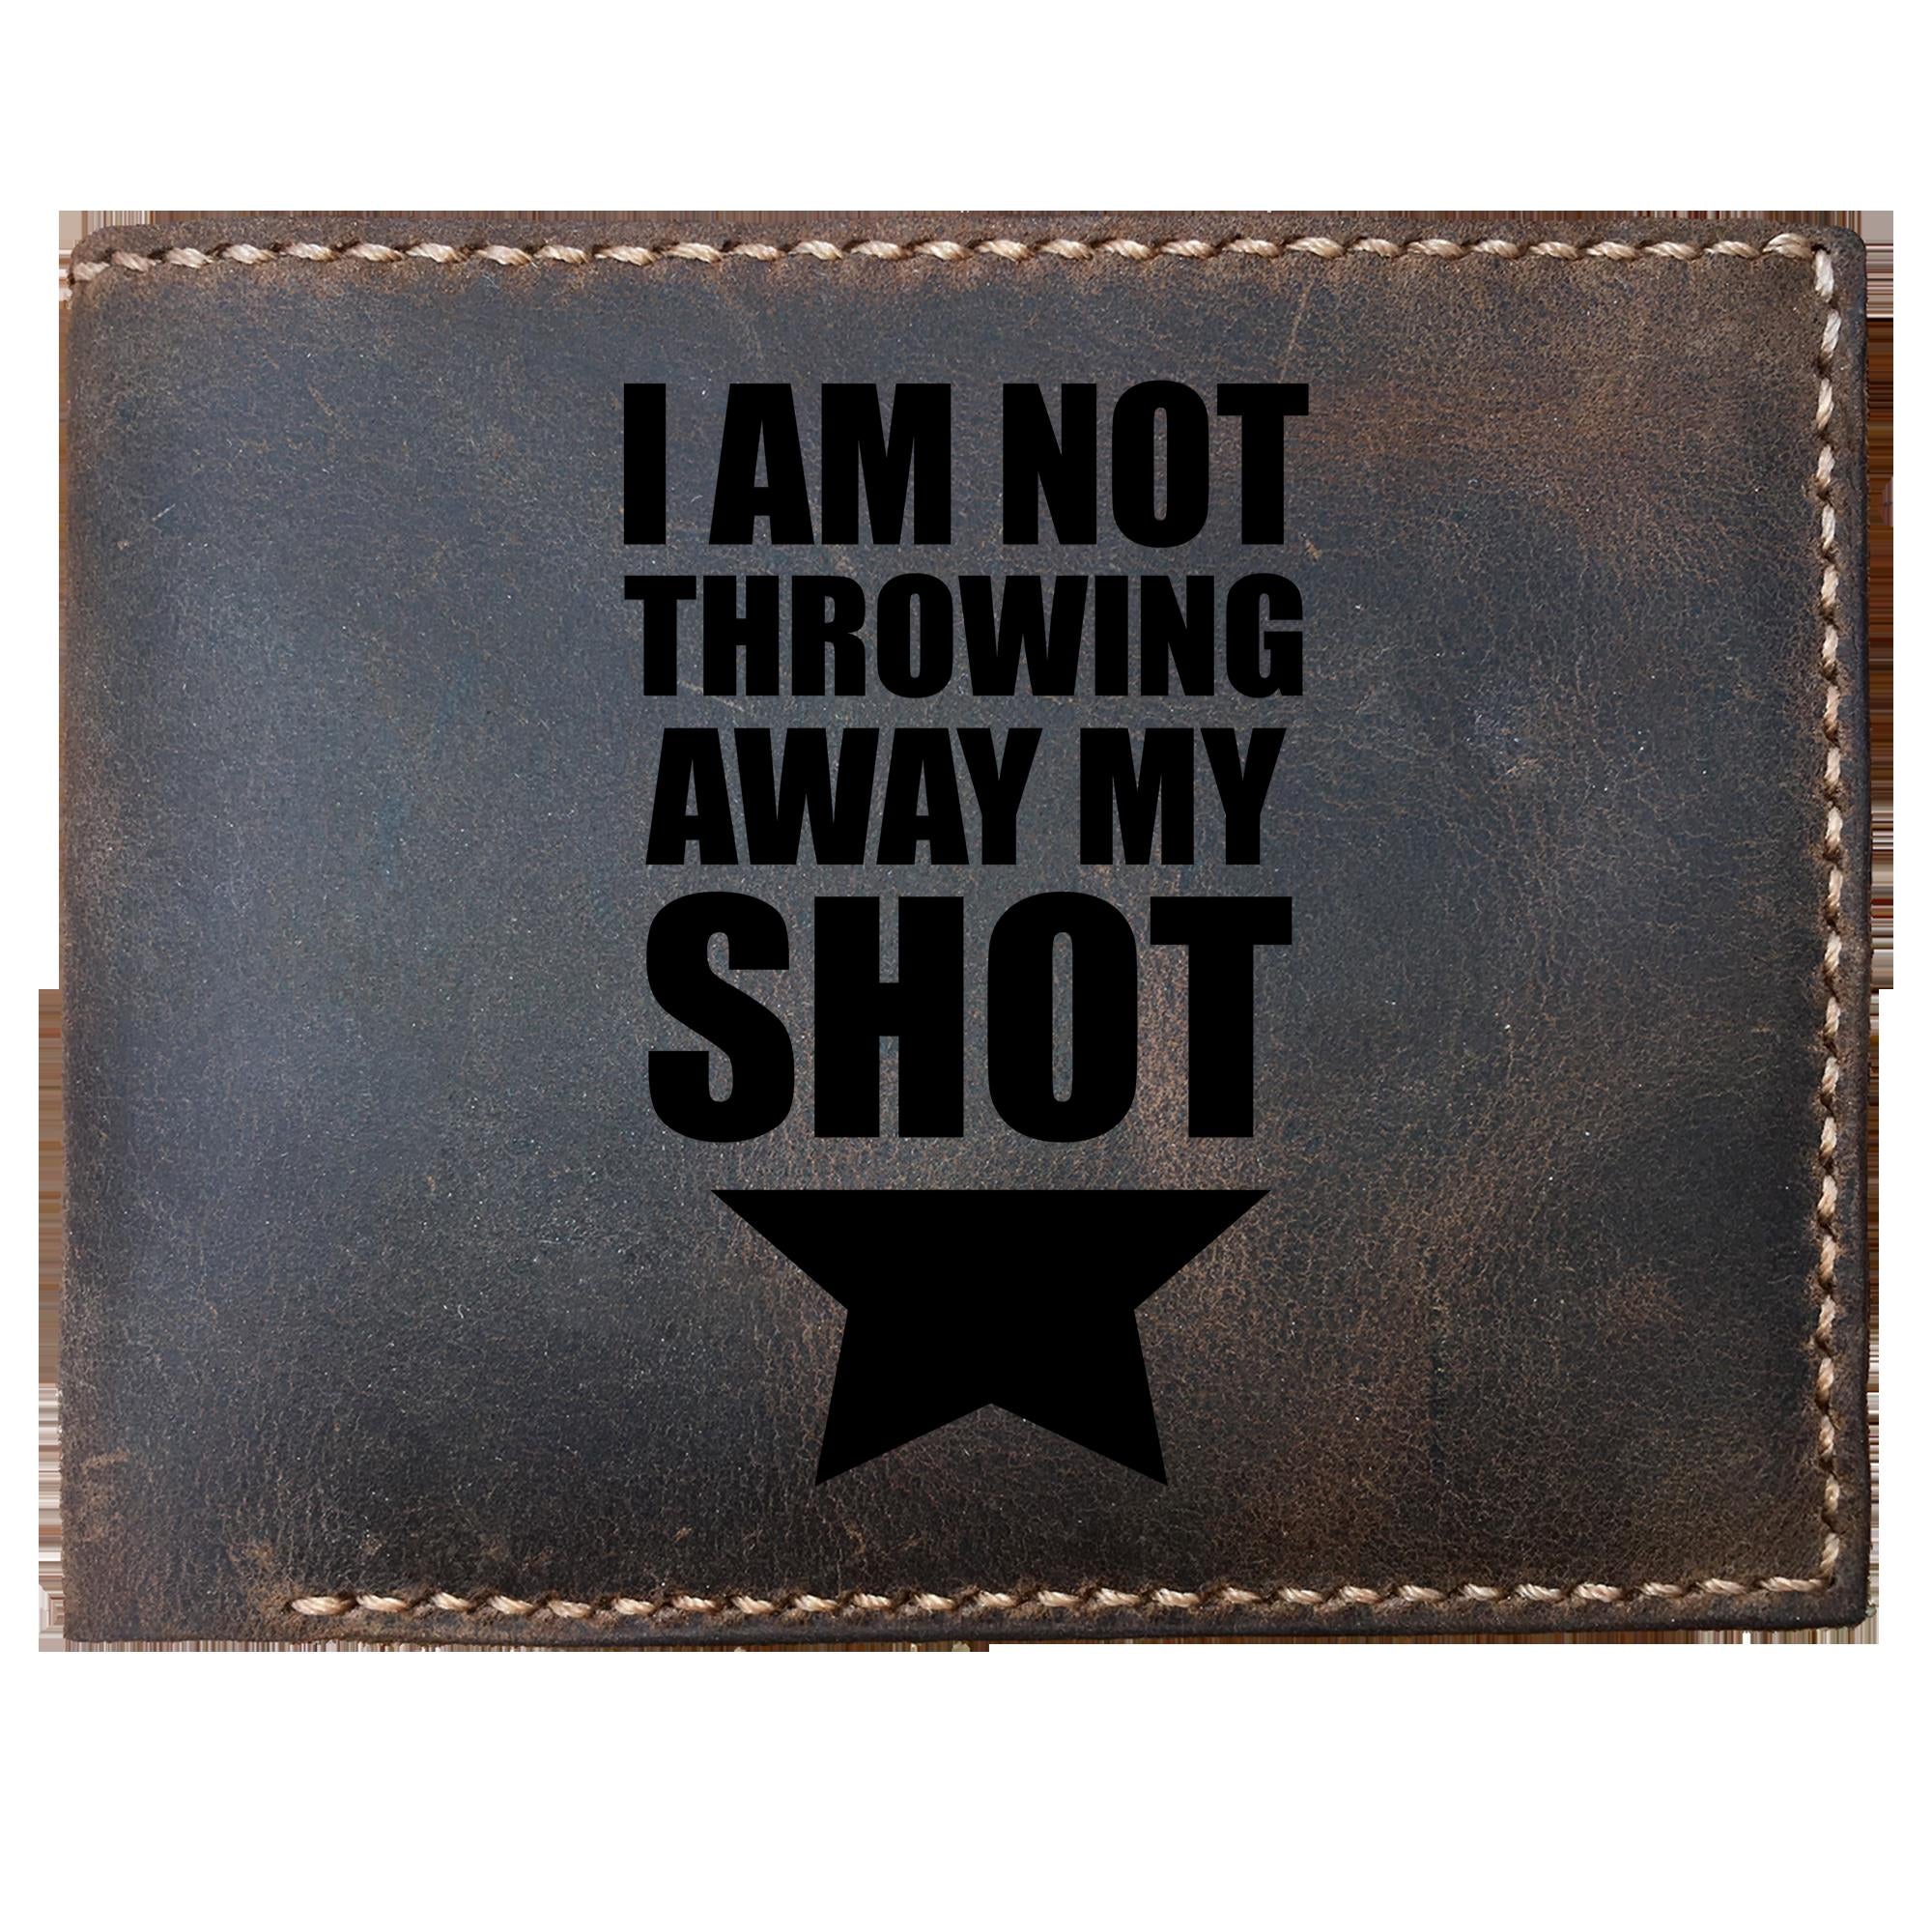 Skitongifts Funny Custom Laser Engraved Bifold Leather Wallet For Men, Hamiton. I Am Not Throwing Away My Shot